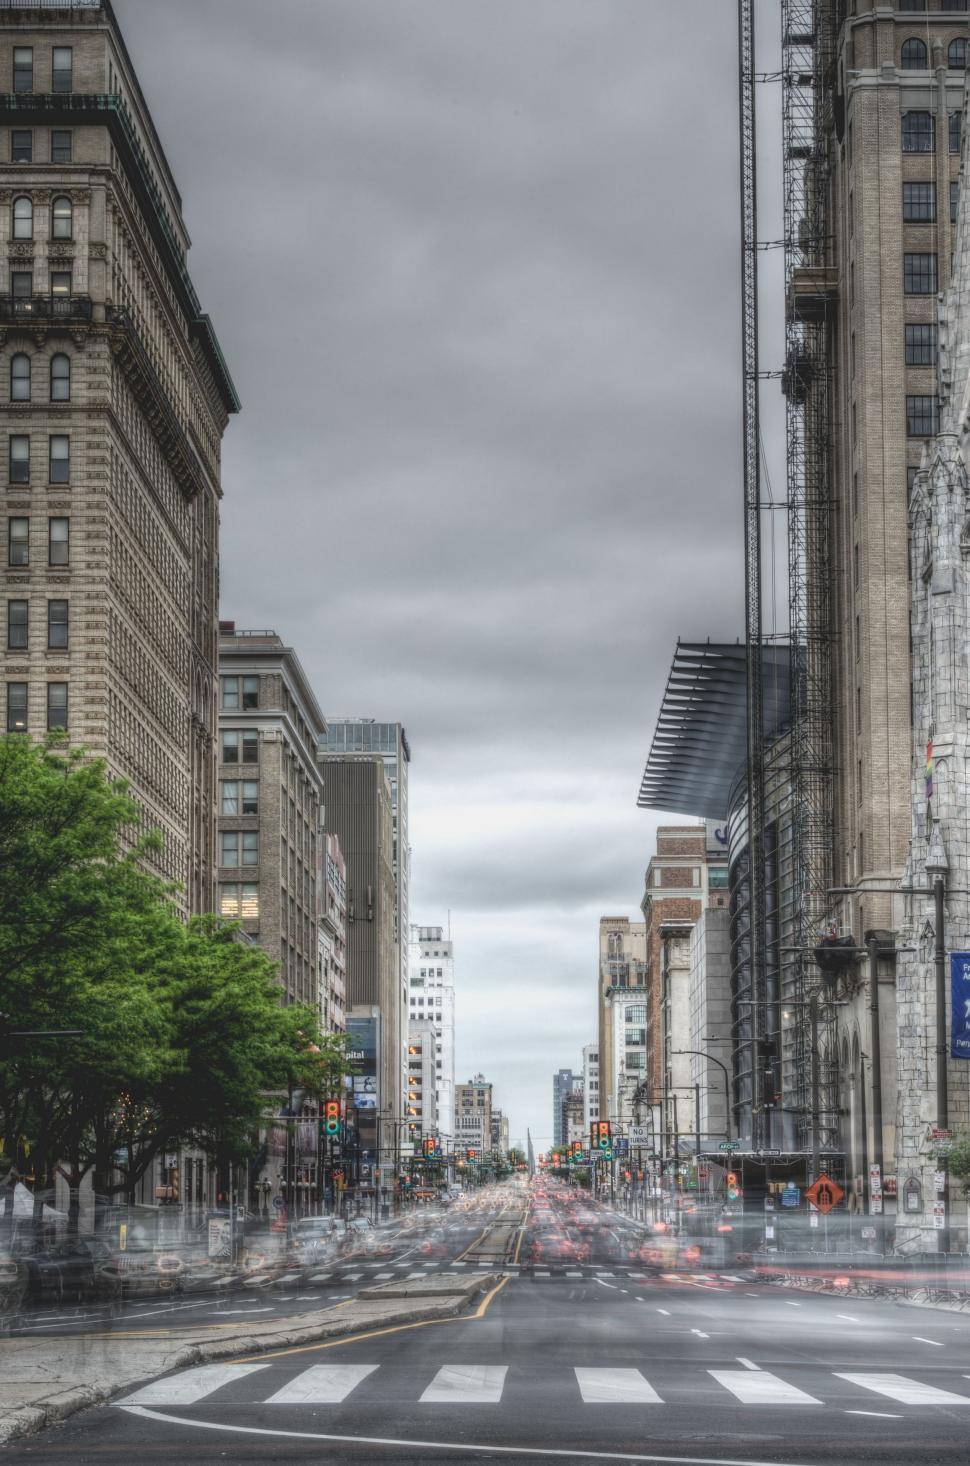 Free Image of Busy City Street With Tall Buildings and Crosswalk 